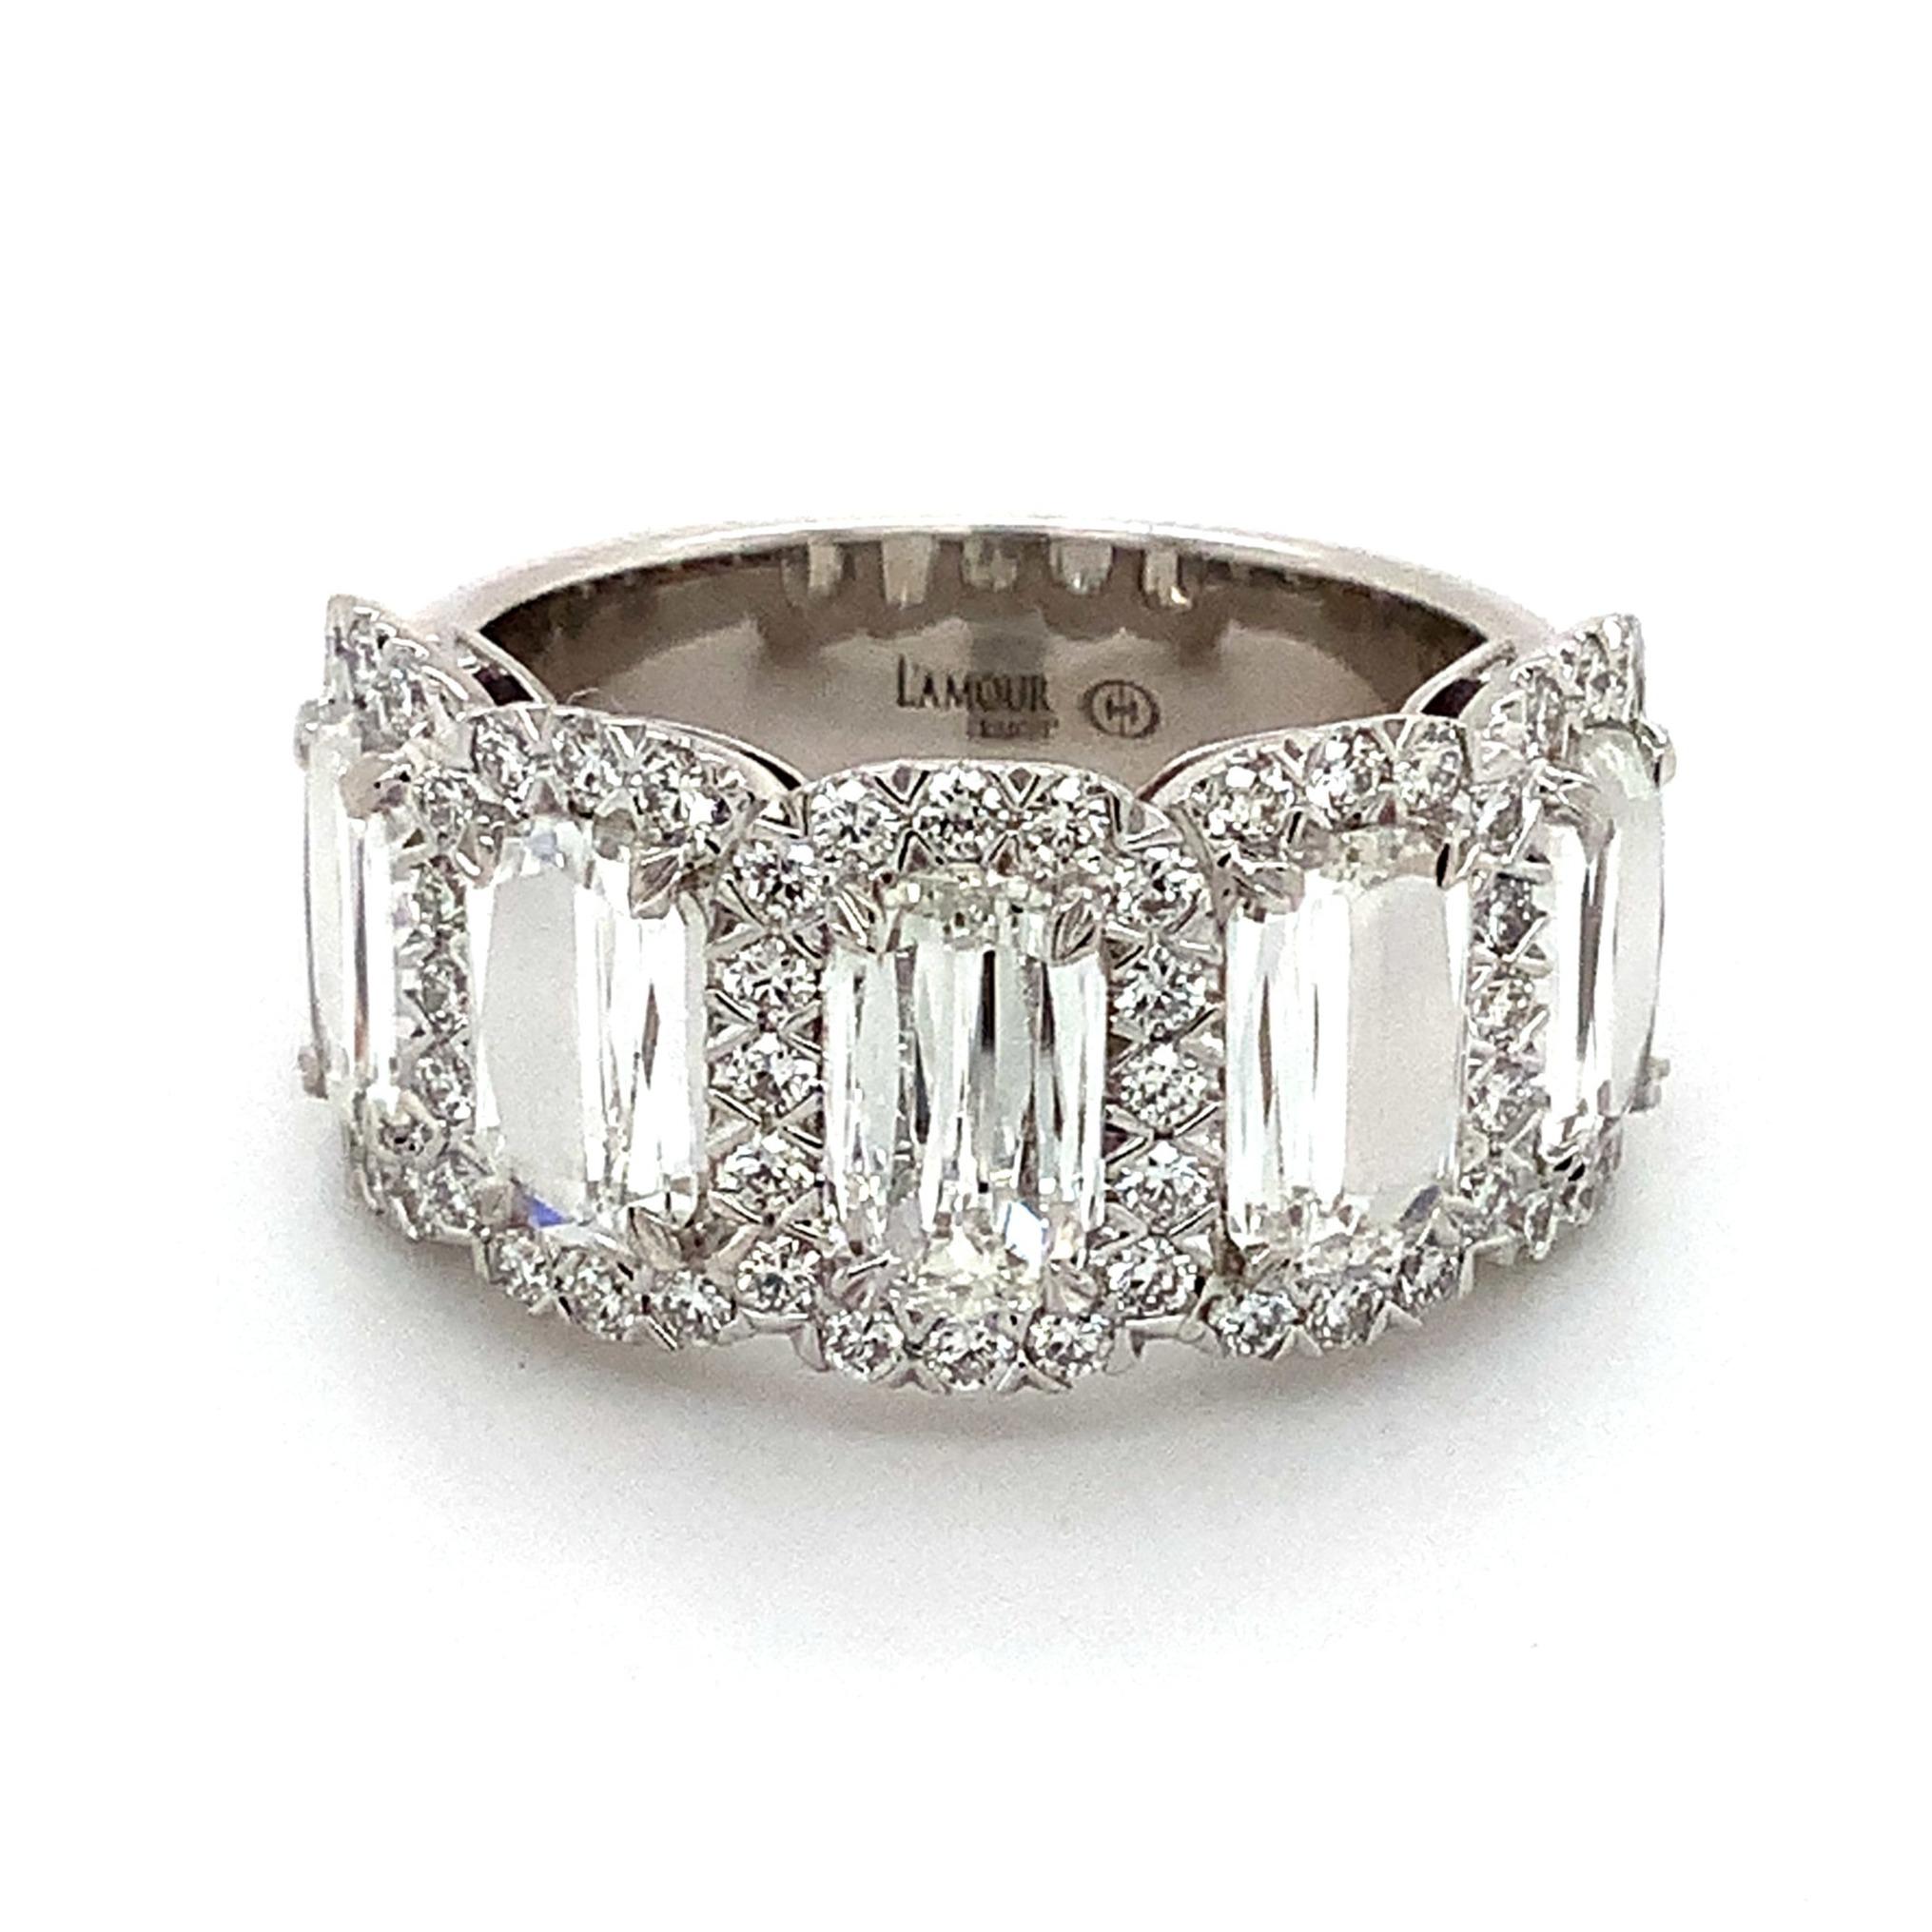 This Christopher Designs L'Amour Crisscut® Halo Diamond Ring is crafted with 18k white gold and boasts a total of 3.41 carats of diamonds, including 5 L'Amour Crisscut® diamonds with 2.74 carats t.w.
Center Diamond is Color: E,  Clarity: VS, 
Melee